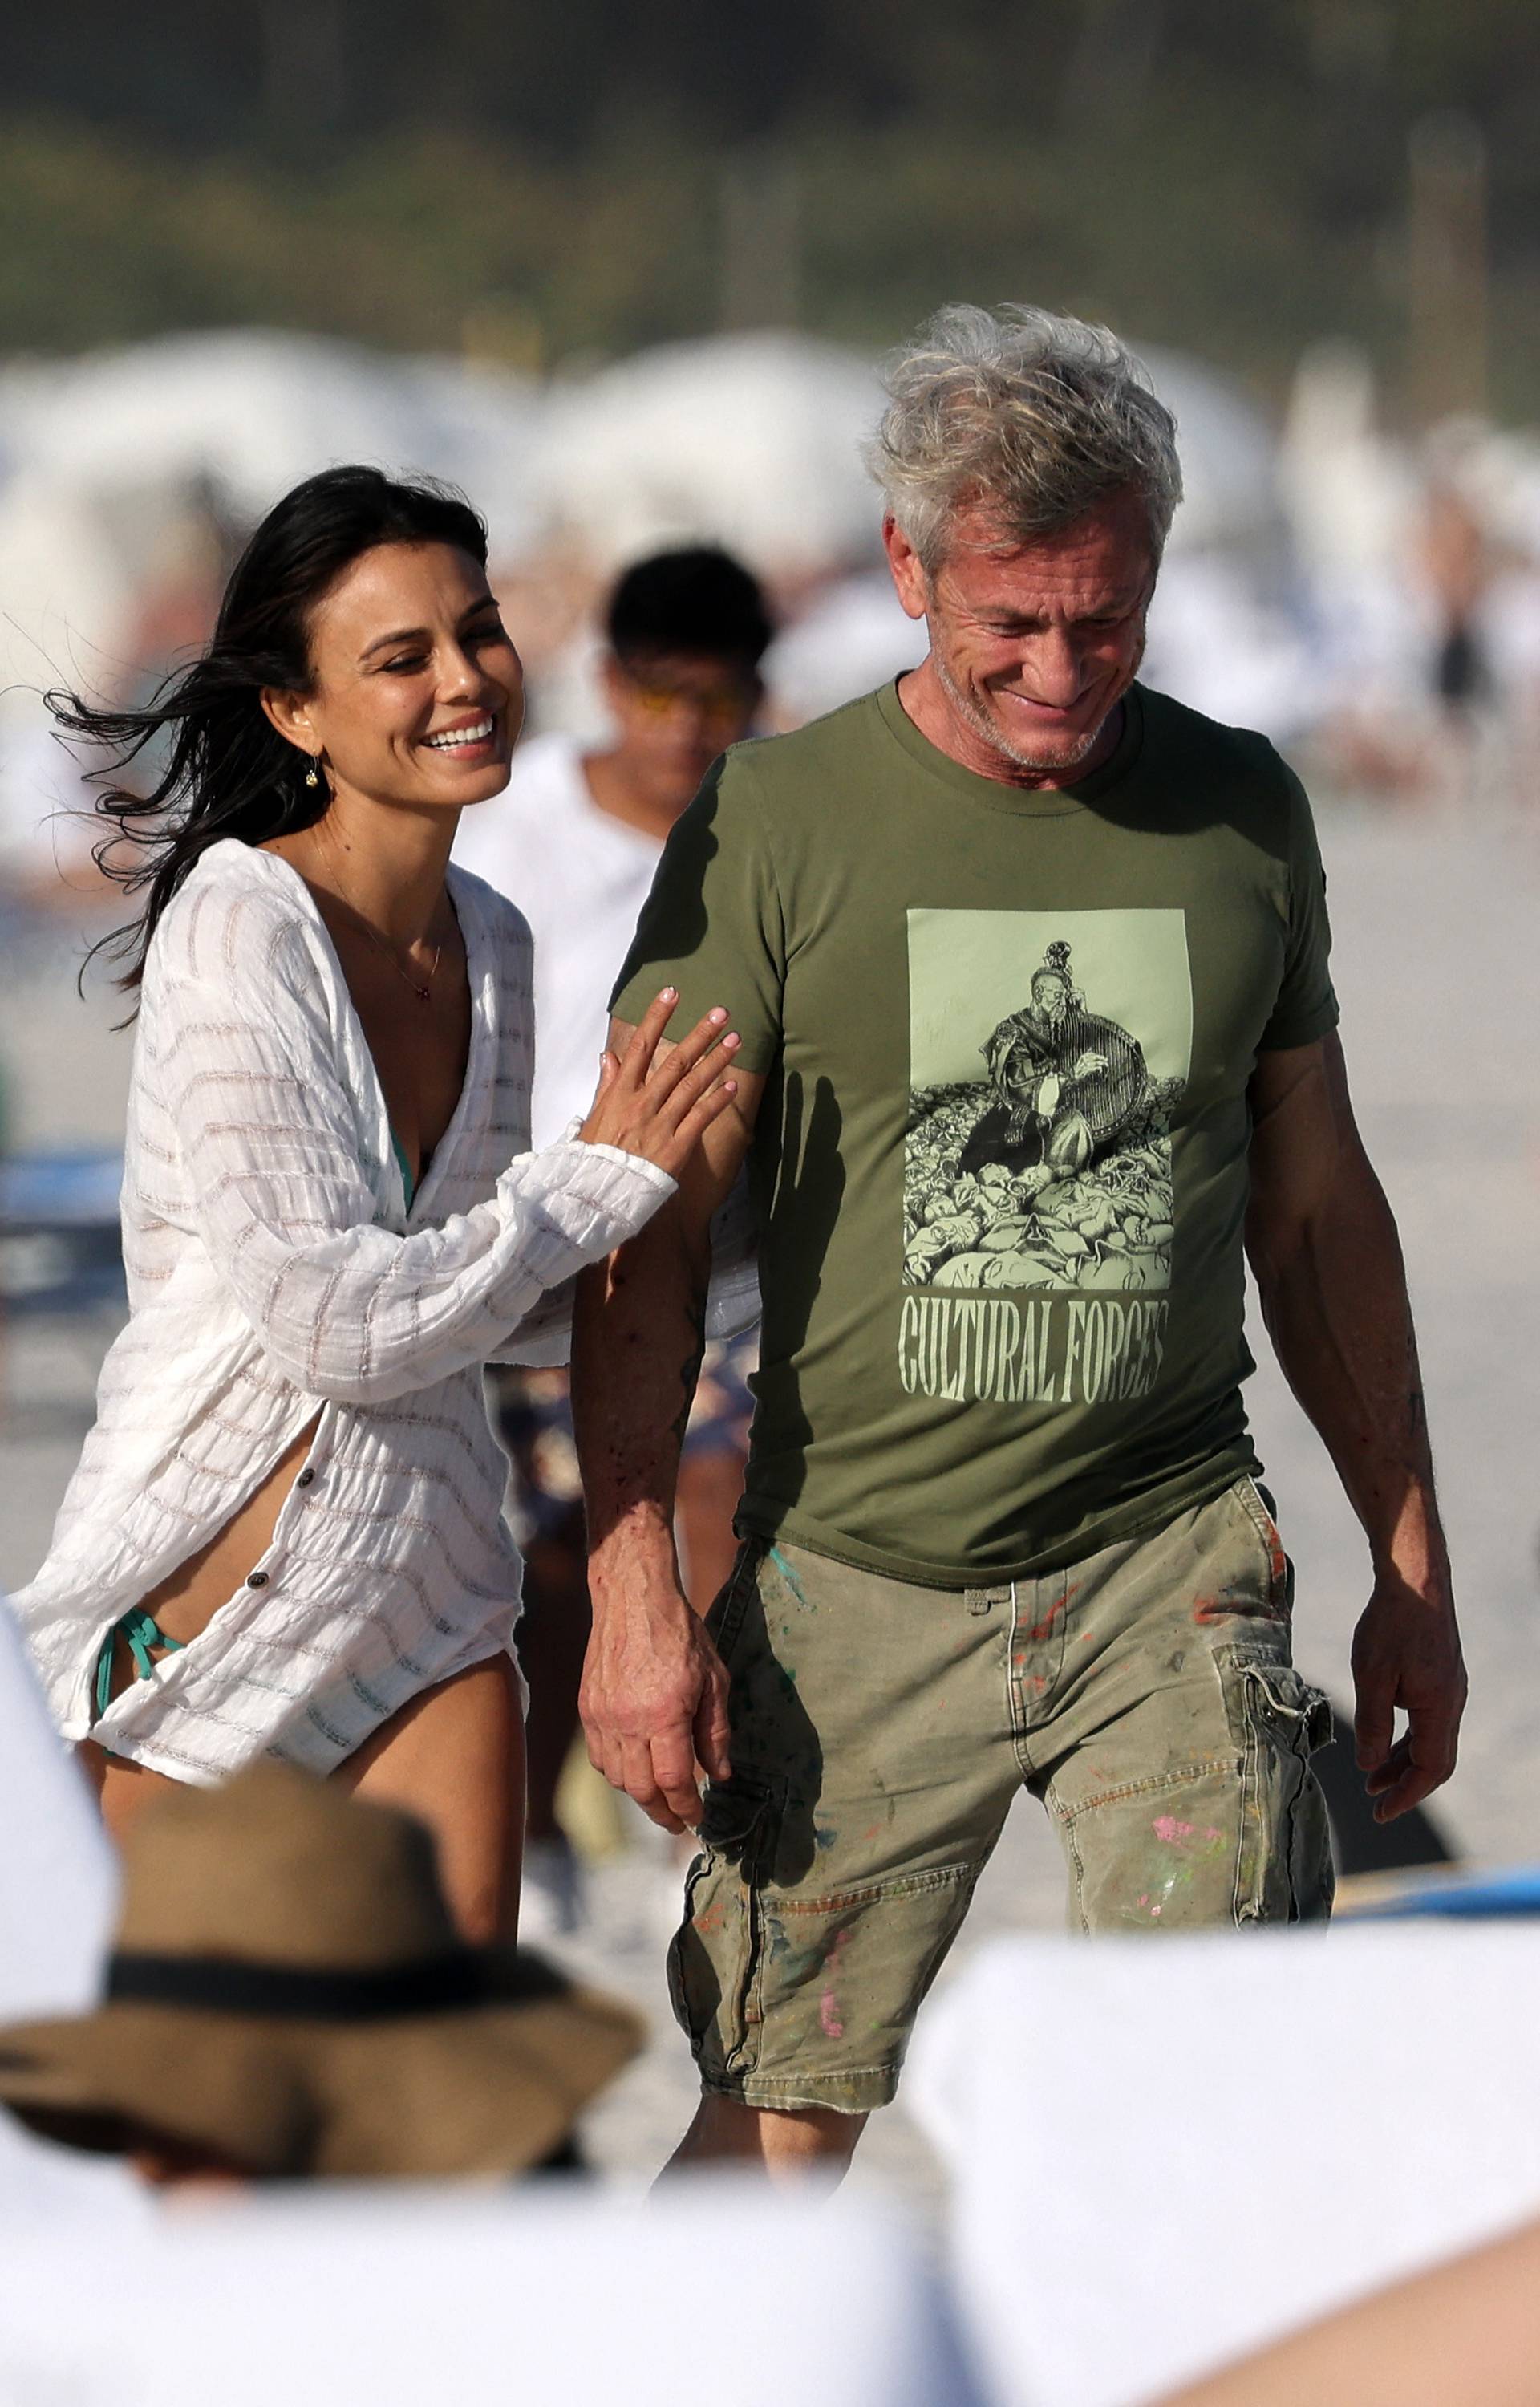 EXCLUSIVE: Sean Penn takes a cozy beach stroll with stunning actress Nathalie Kelley during Art Basel in Miami